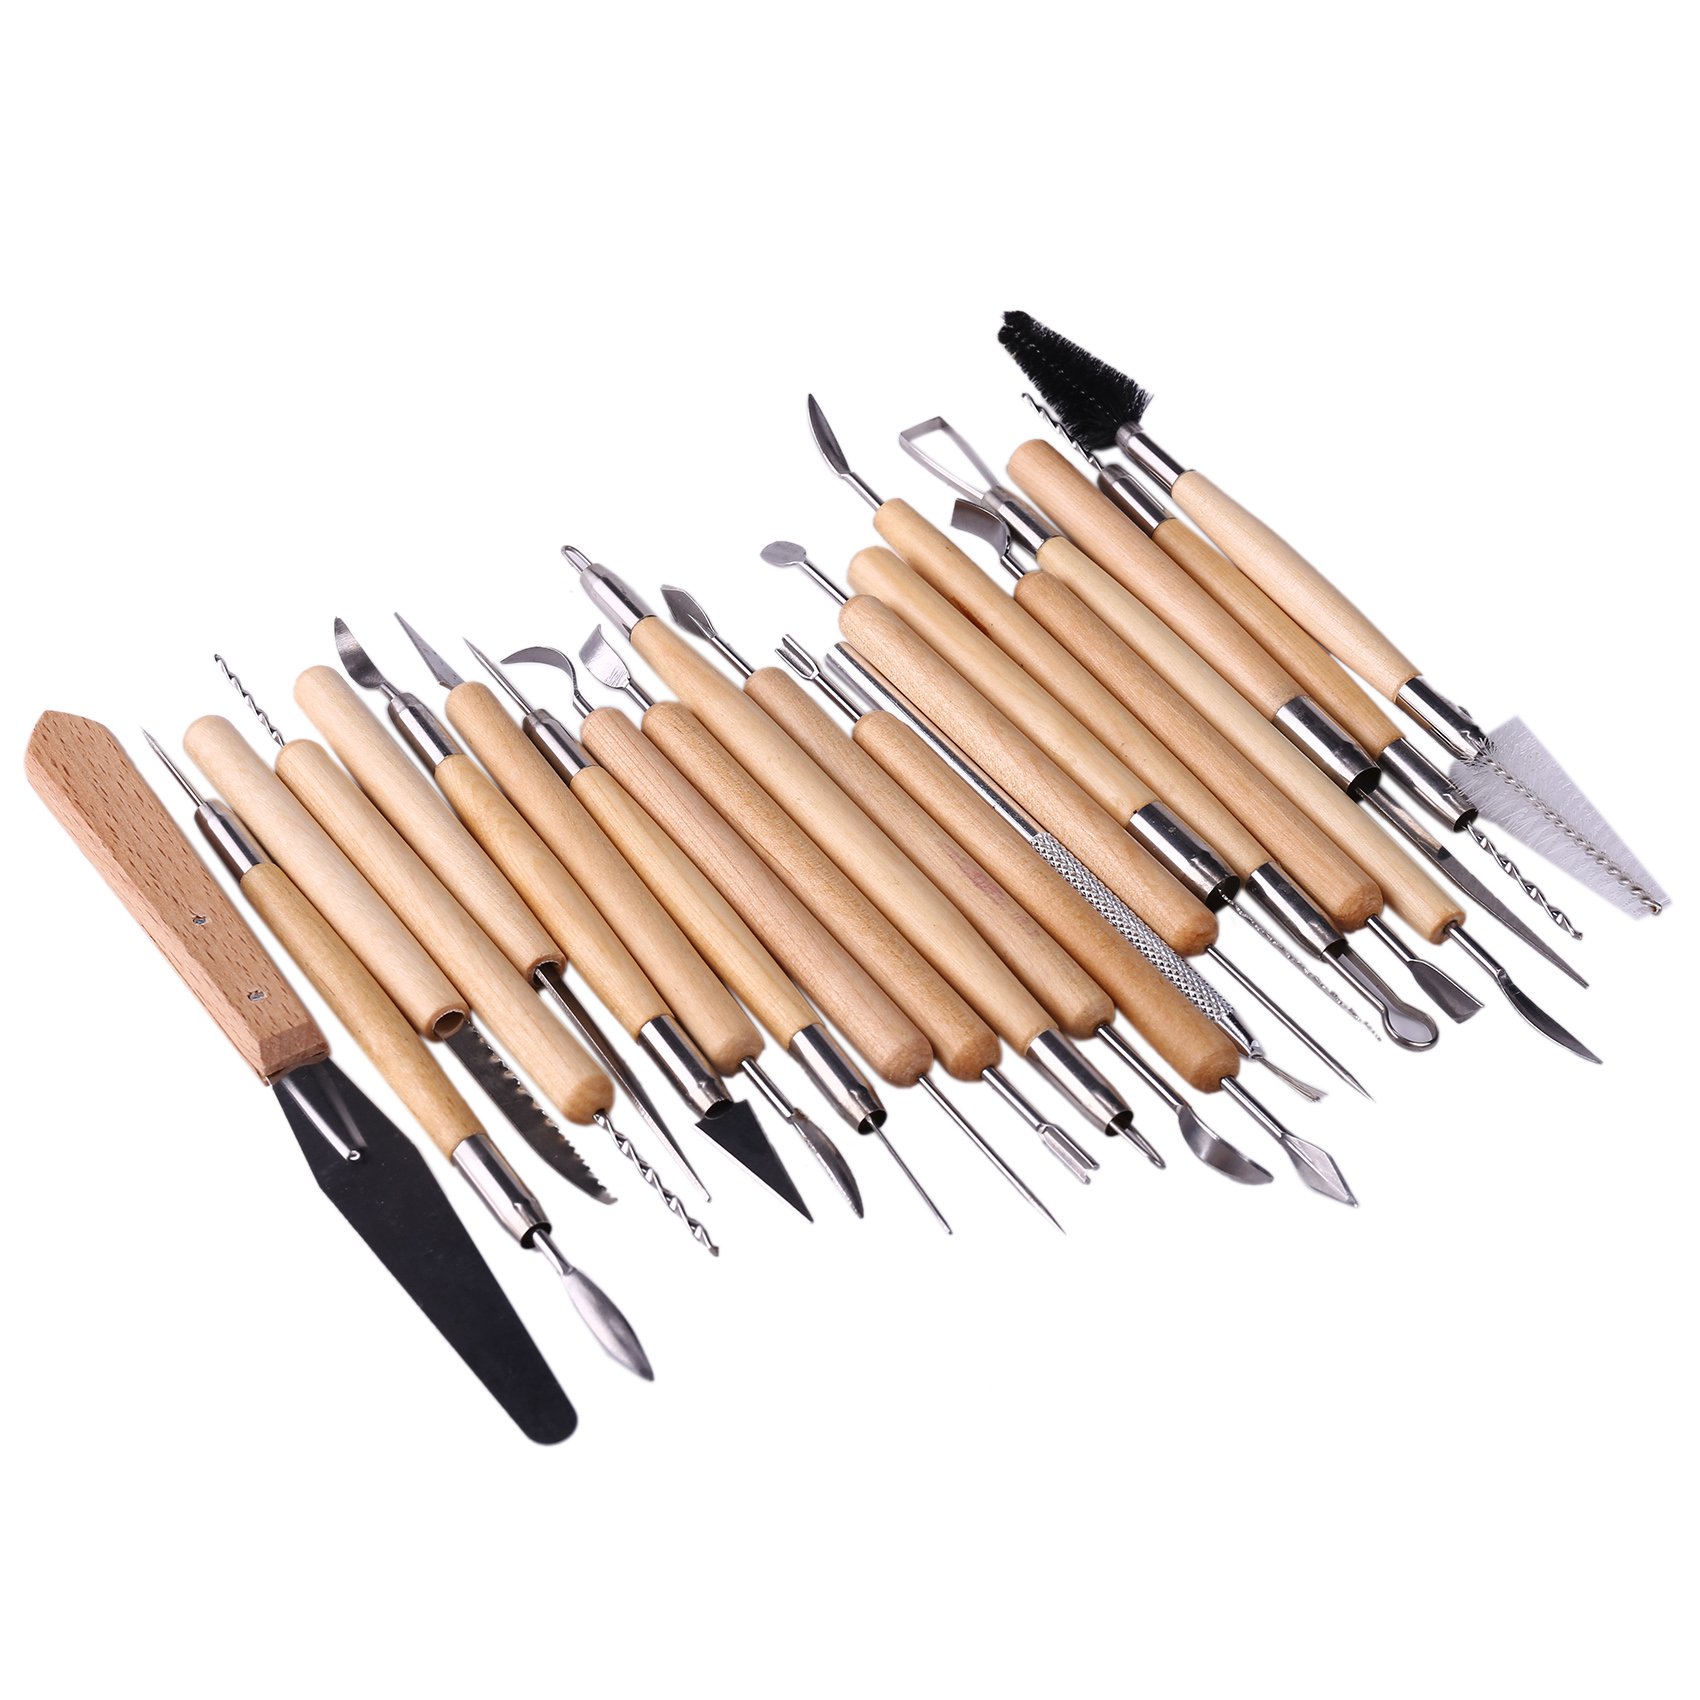 30 Handicraft Clay Carving Tools Pottery Carving Tools Pottery and Ceramic  Wooden Handle Modeling Clay Tools 